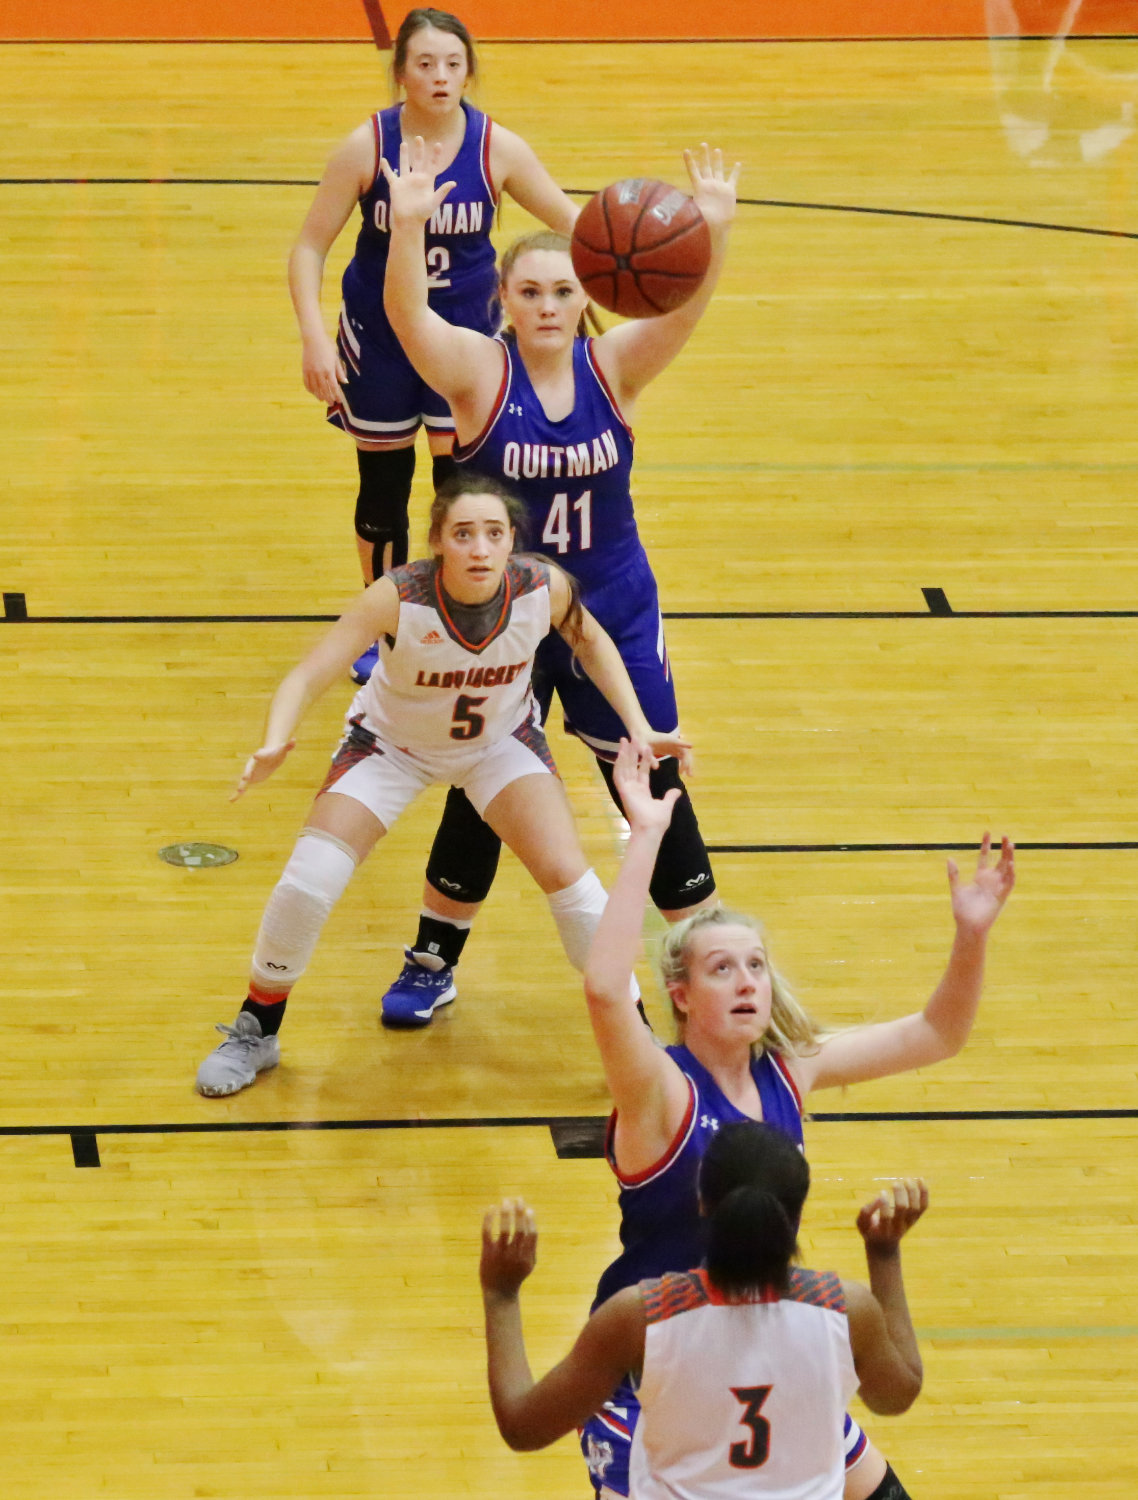 Lady Jacket Kelsey Brewington (5) guarded by Quitman’s Reiny Luman (41) prepares to take a pass from Sabria Dean (3) in action last Friday.